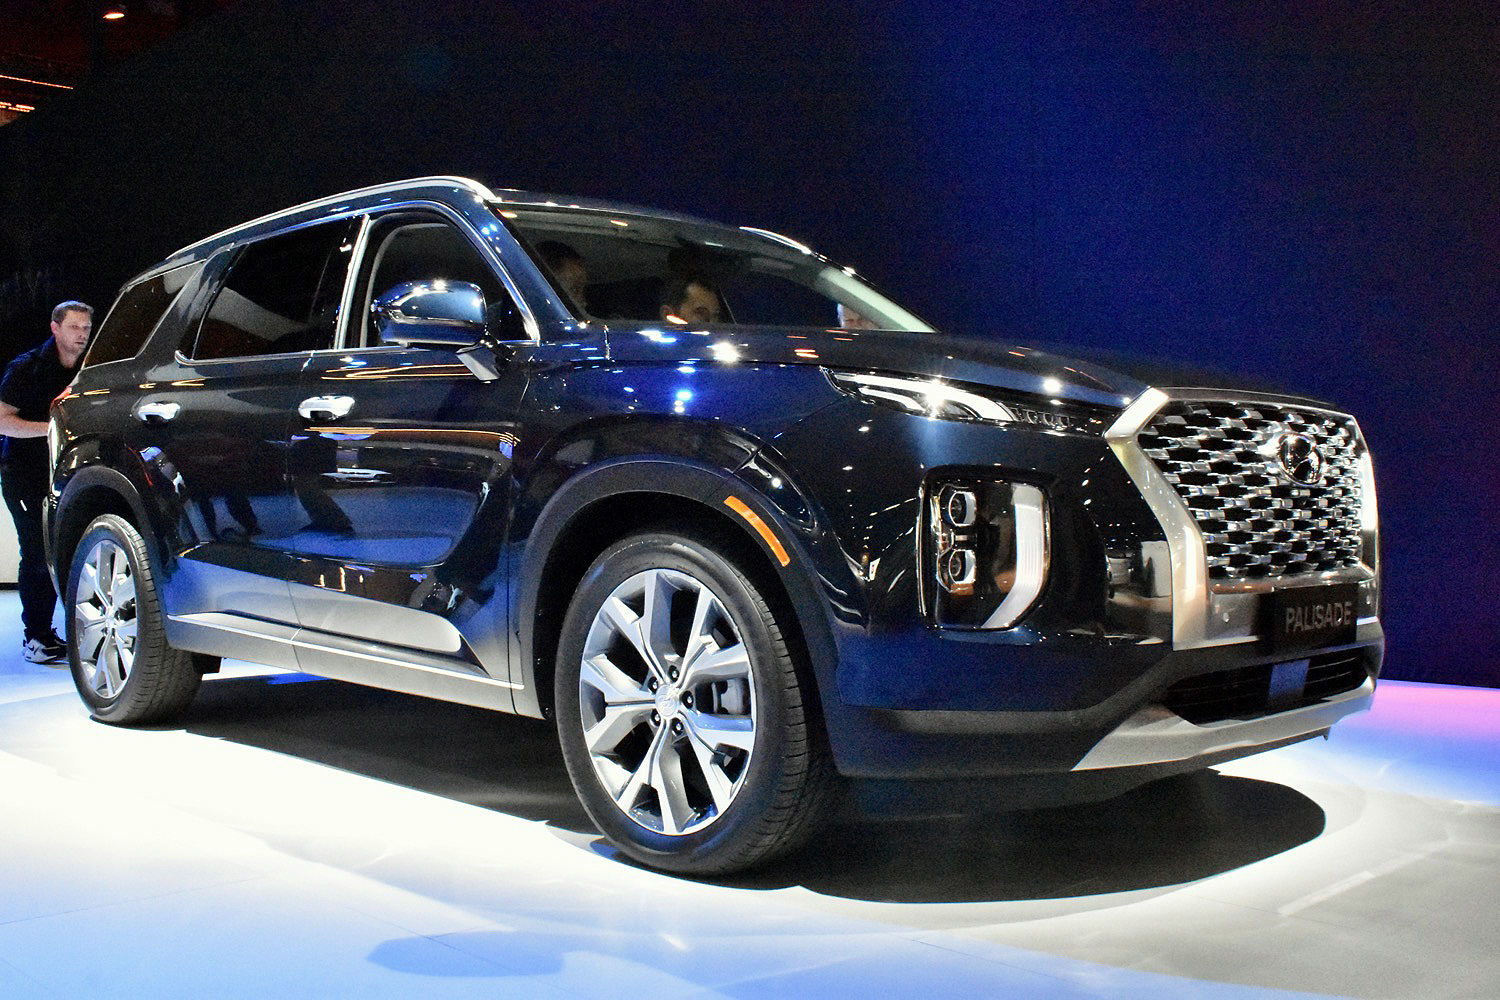 2020 Hyundai Palisade Seats Eight, Comes With Useful Tech | Digital Trends